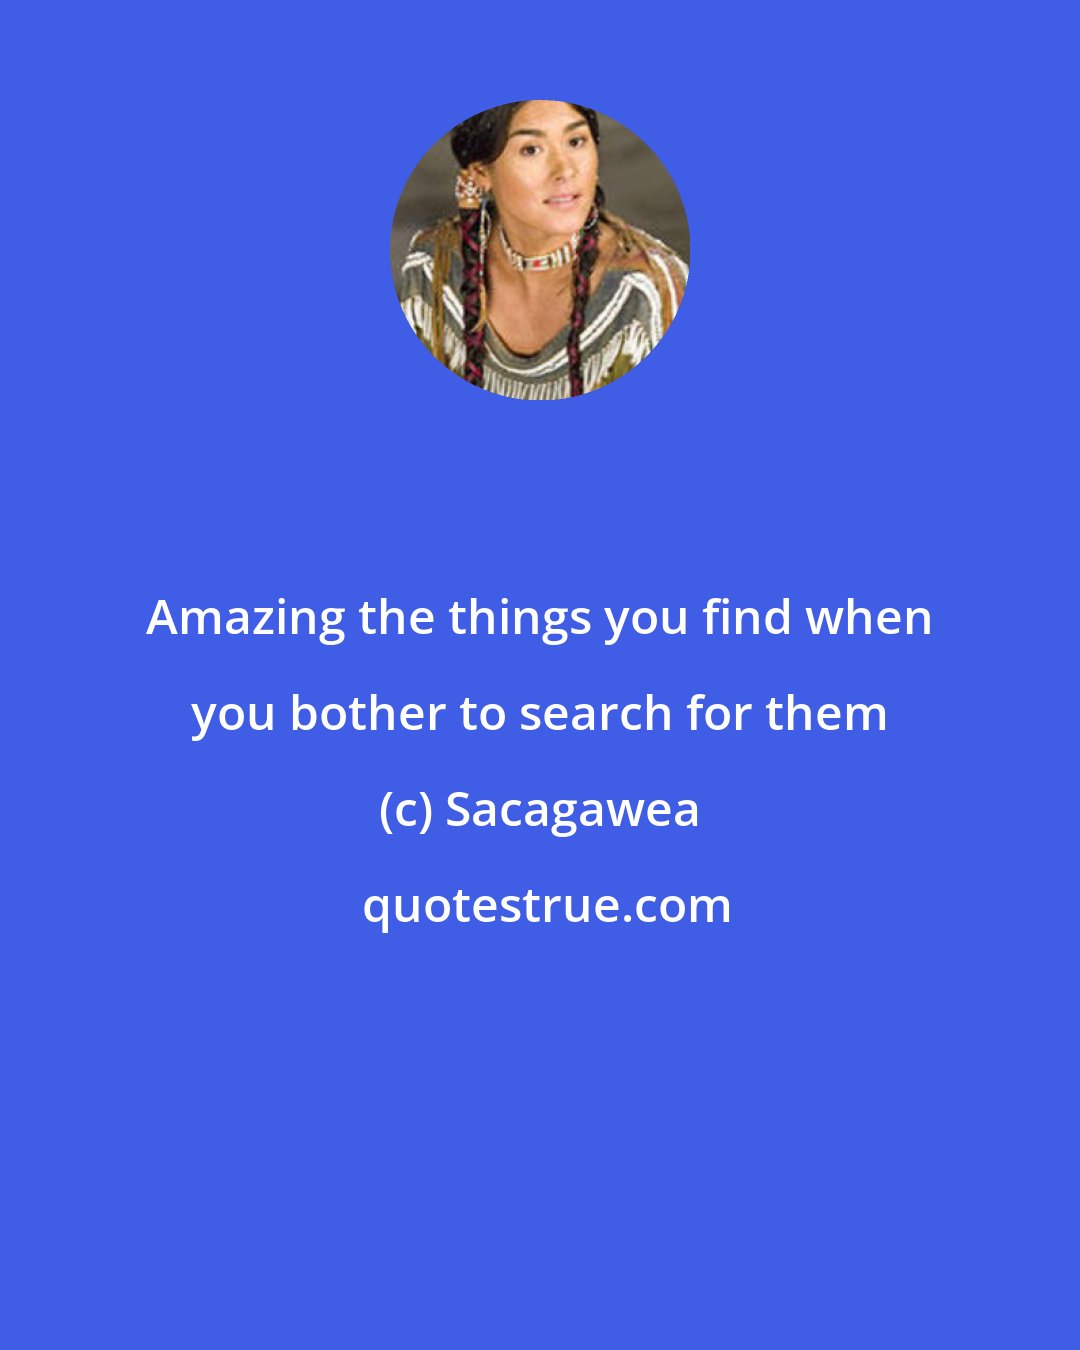 Sacagawea: Amazing the things you find when you bother to search for them